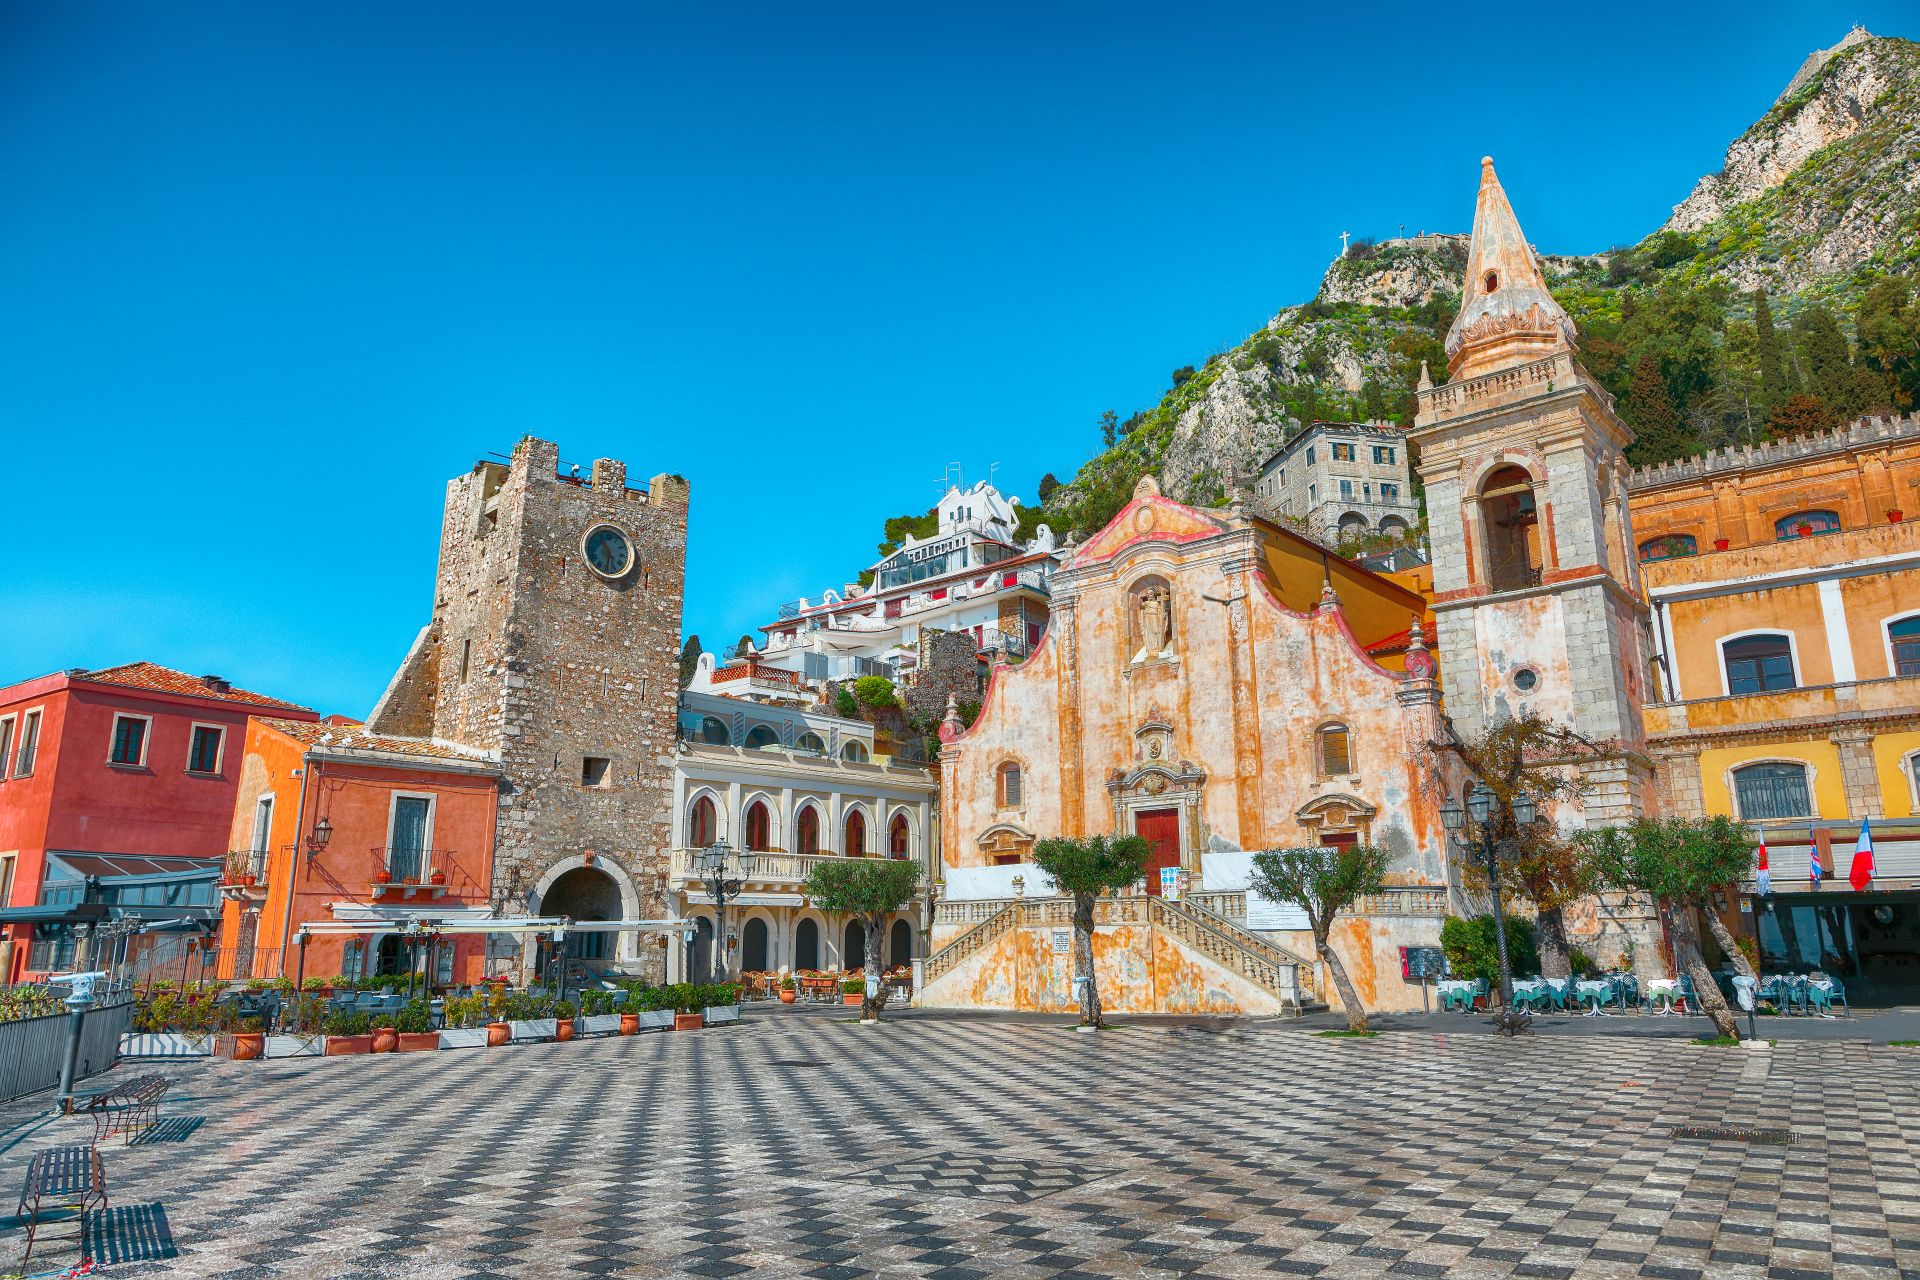 Belvedere-of-Taormina-and-San-Giuseppe-church-on-the-square-Piazza-IX-Aprile-in-Taormina.-Sicily-Italy